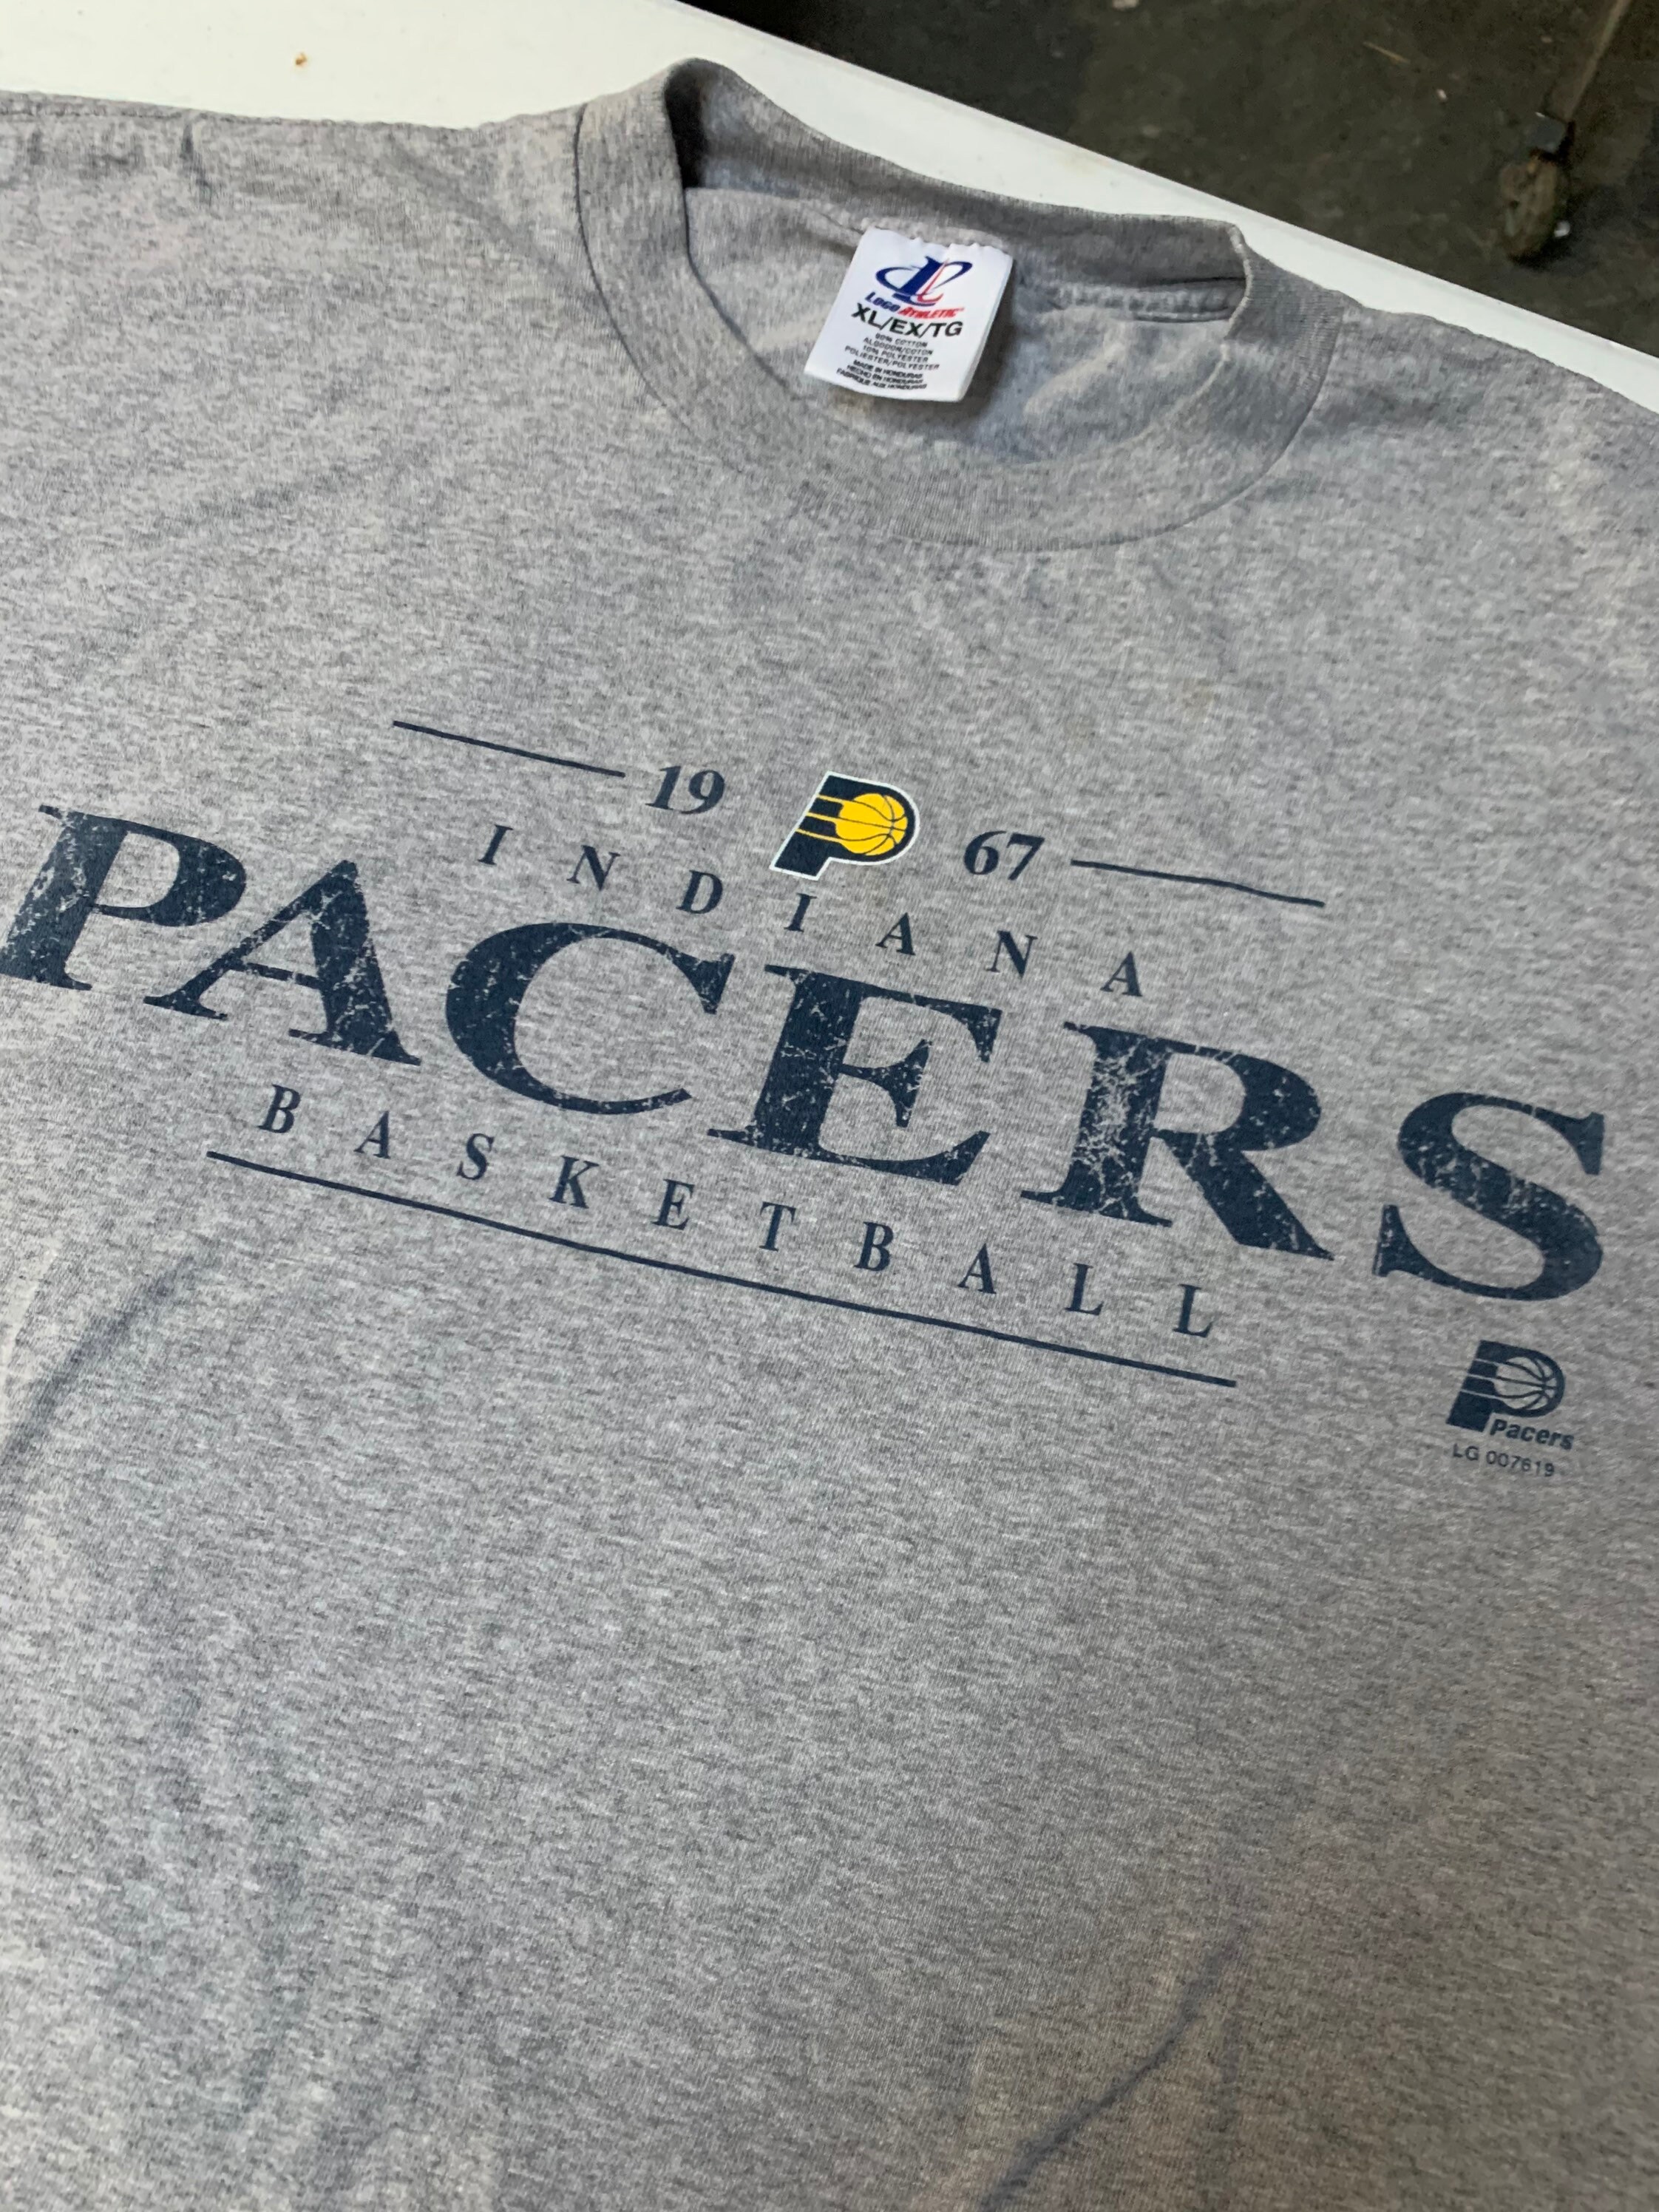 Vintage Indiana Pacers 2000 NBA Championship Shirt Size X-Large